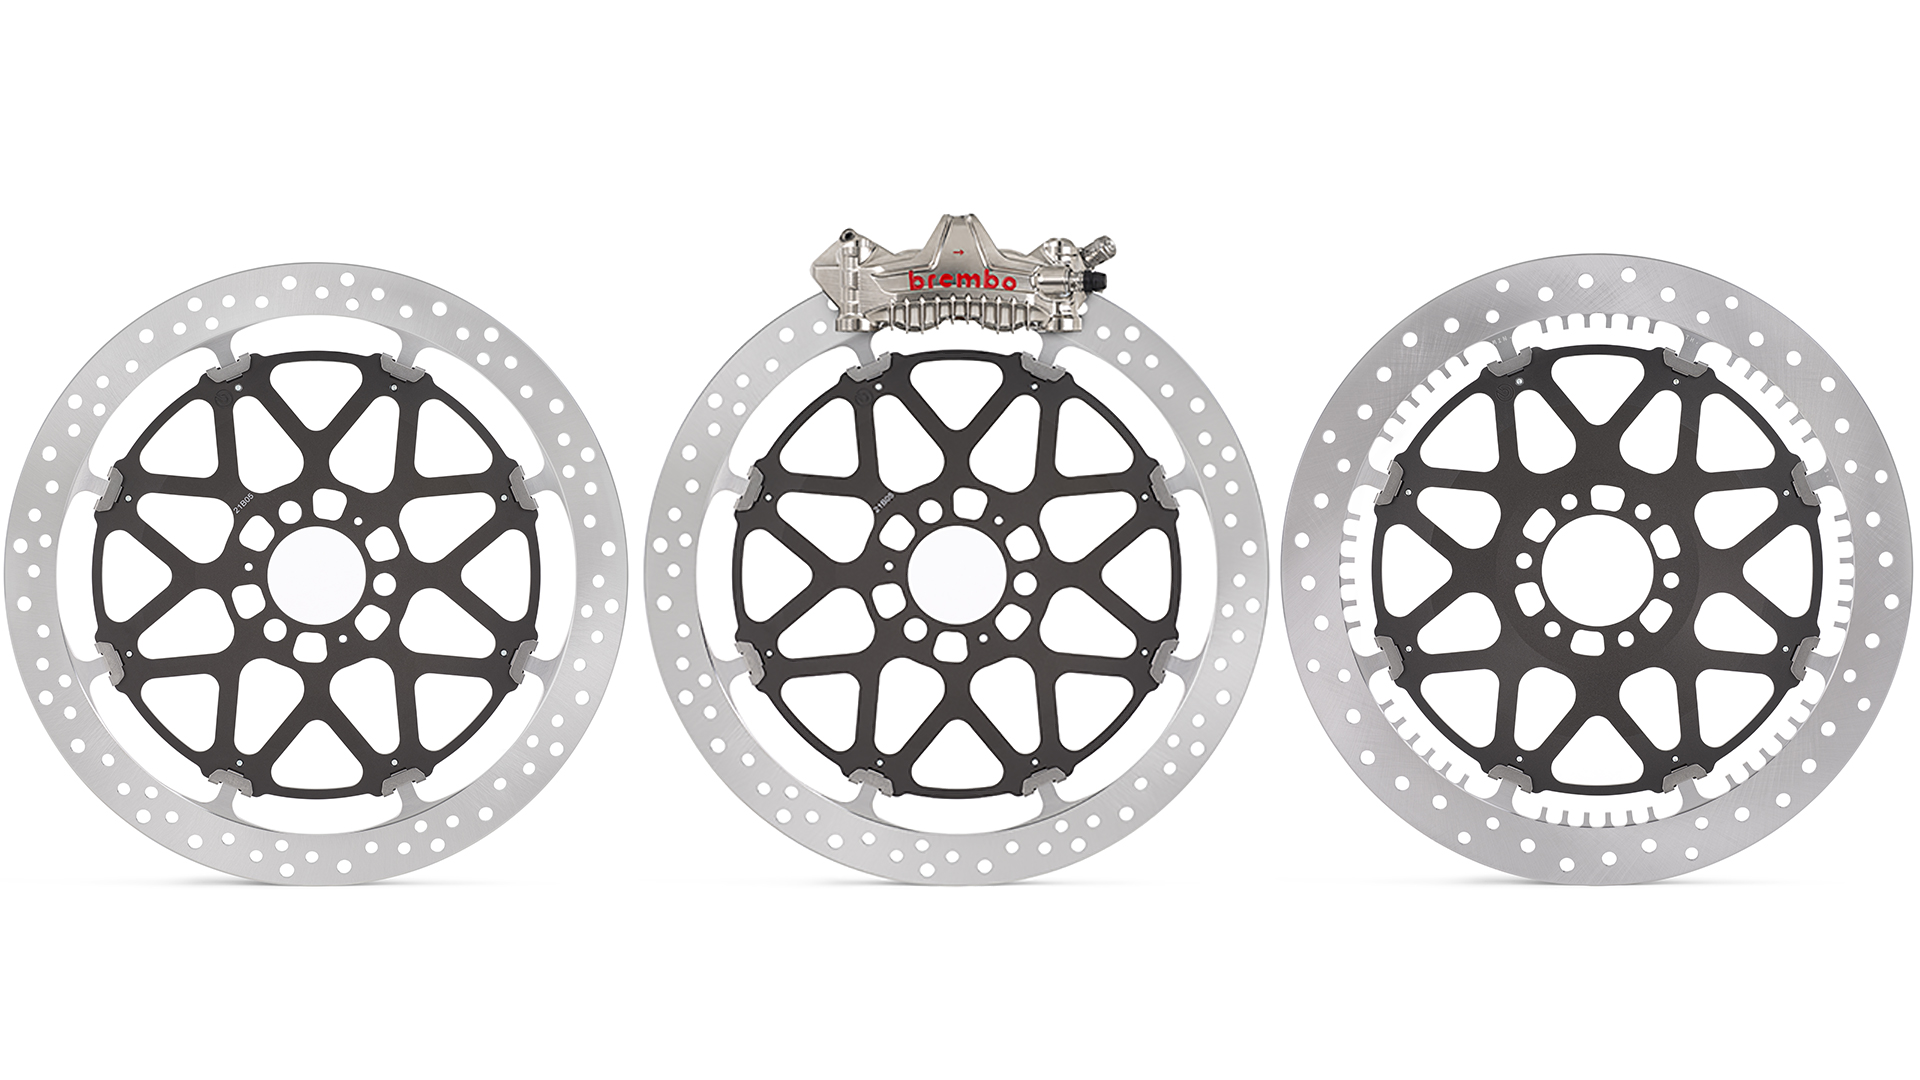 Brembo presents the new braking system for the 2021 World Superbike  Championship